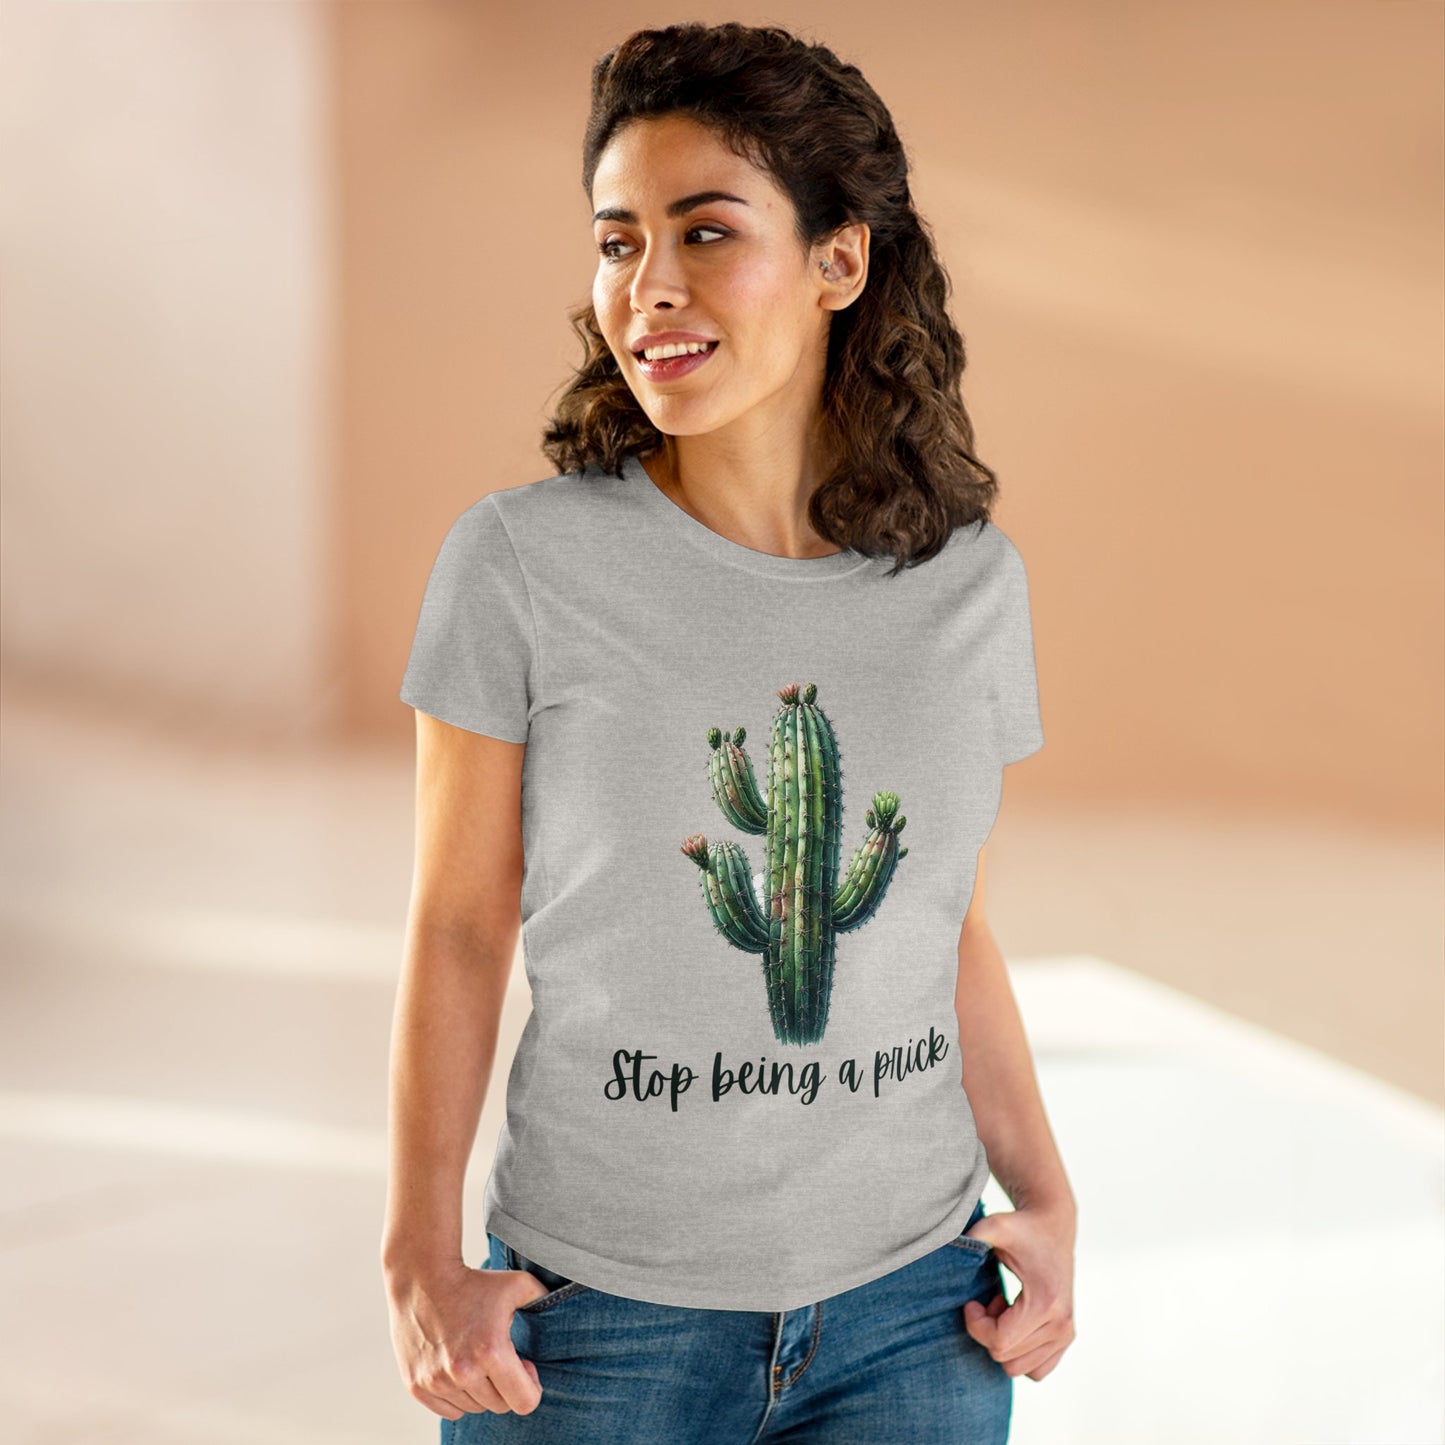 Stop Being A prick t-shirt inspired by More Than Our Fake Vows